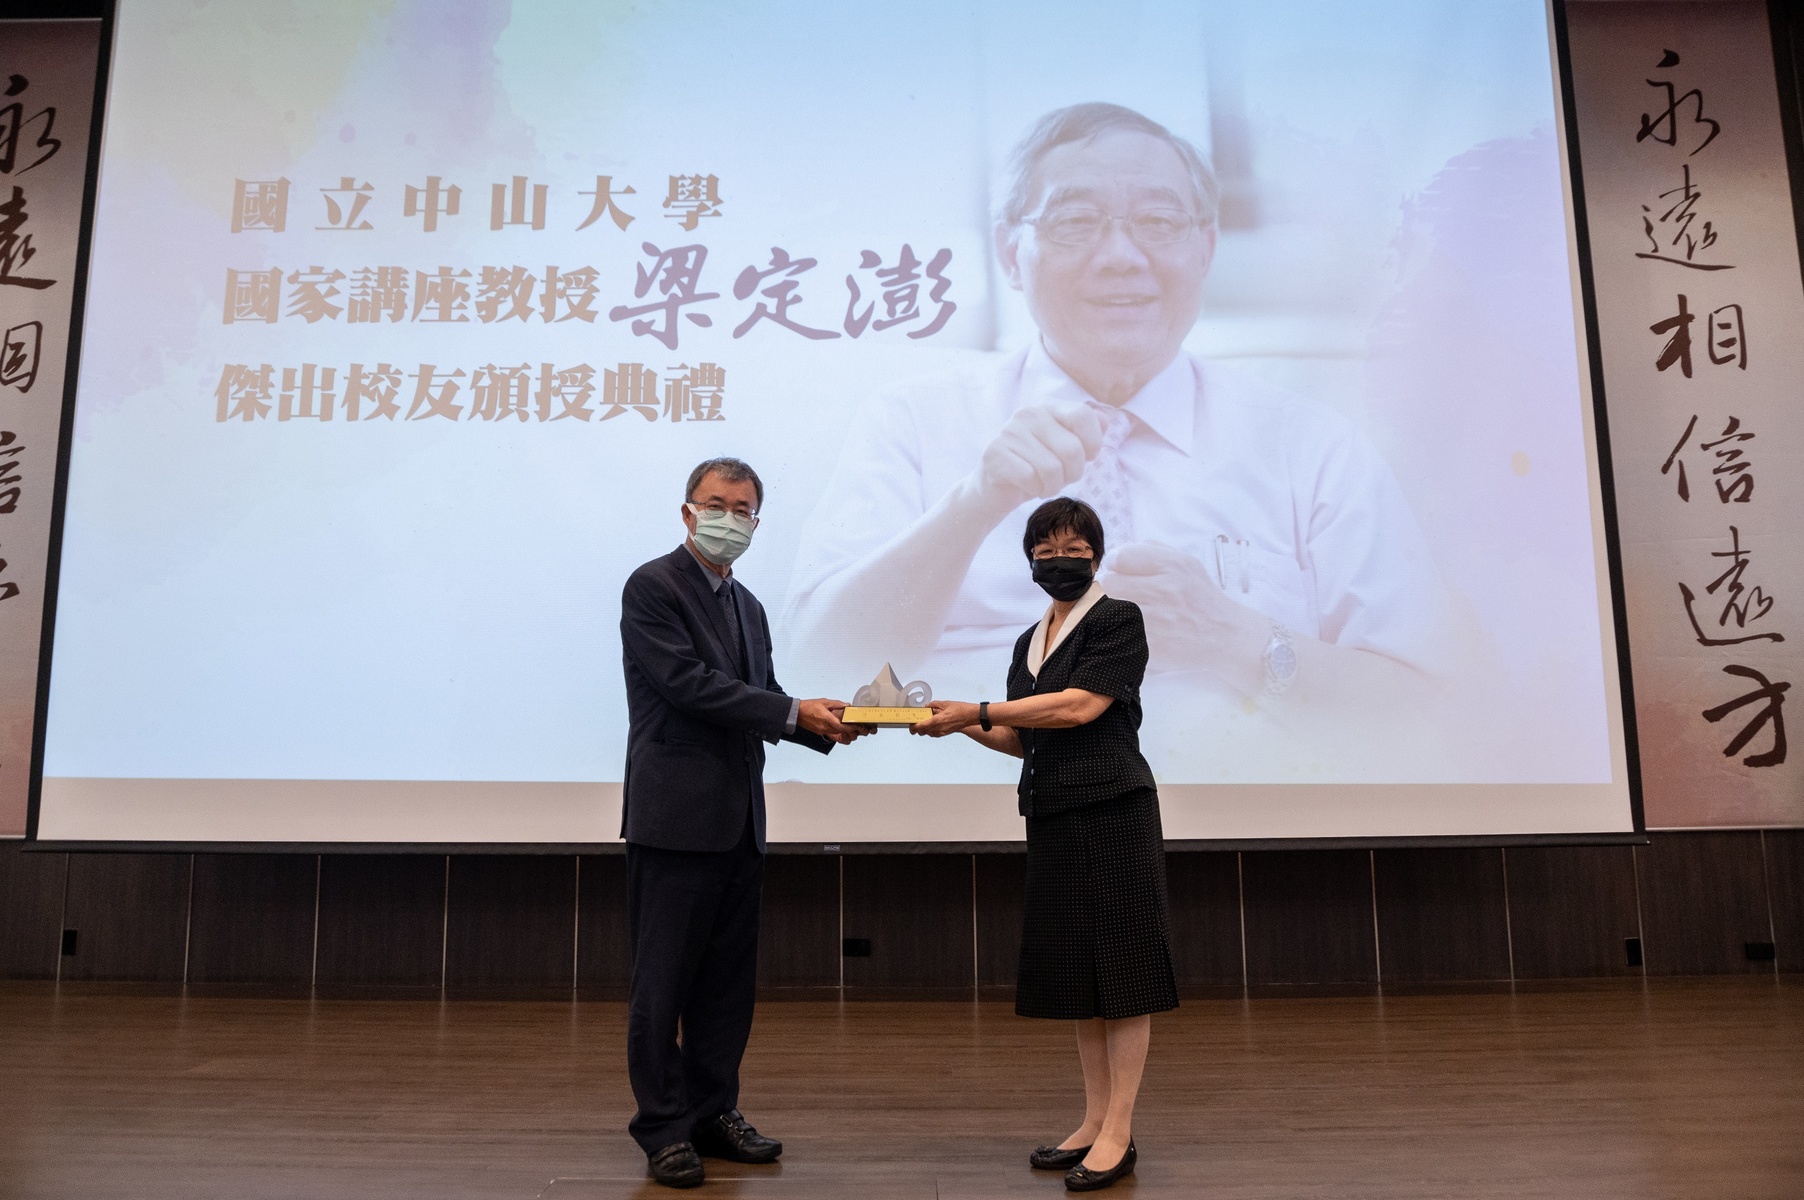 NSYSU President Ying-Yao Cheng (on the left) posthumously conferred the Outstanding Alumni Award to Professor Ting-Peng Liang during the memorial service. Professor Liang’s widow Chen-Li Wang (on the right) received the Award in the name of her late husband.